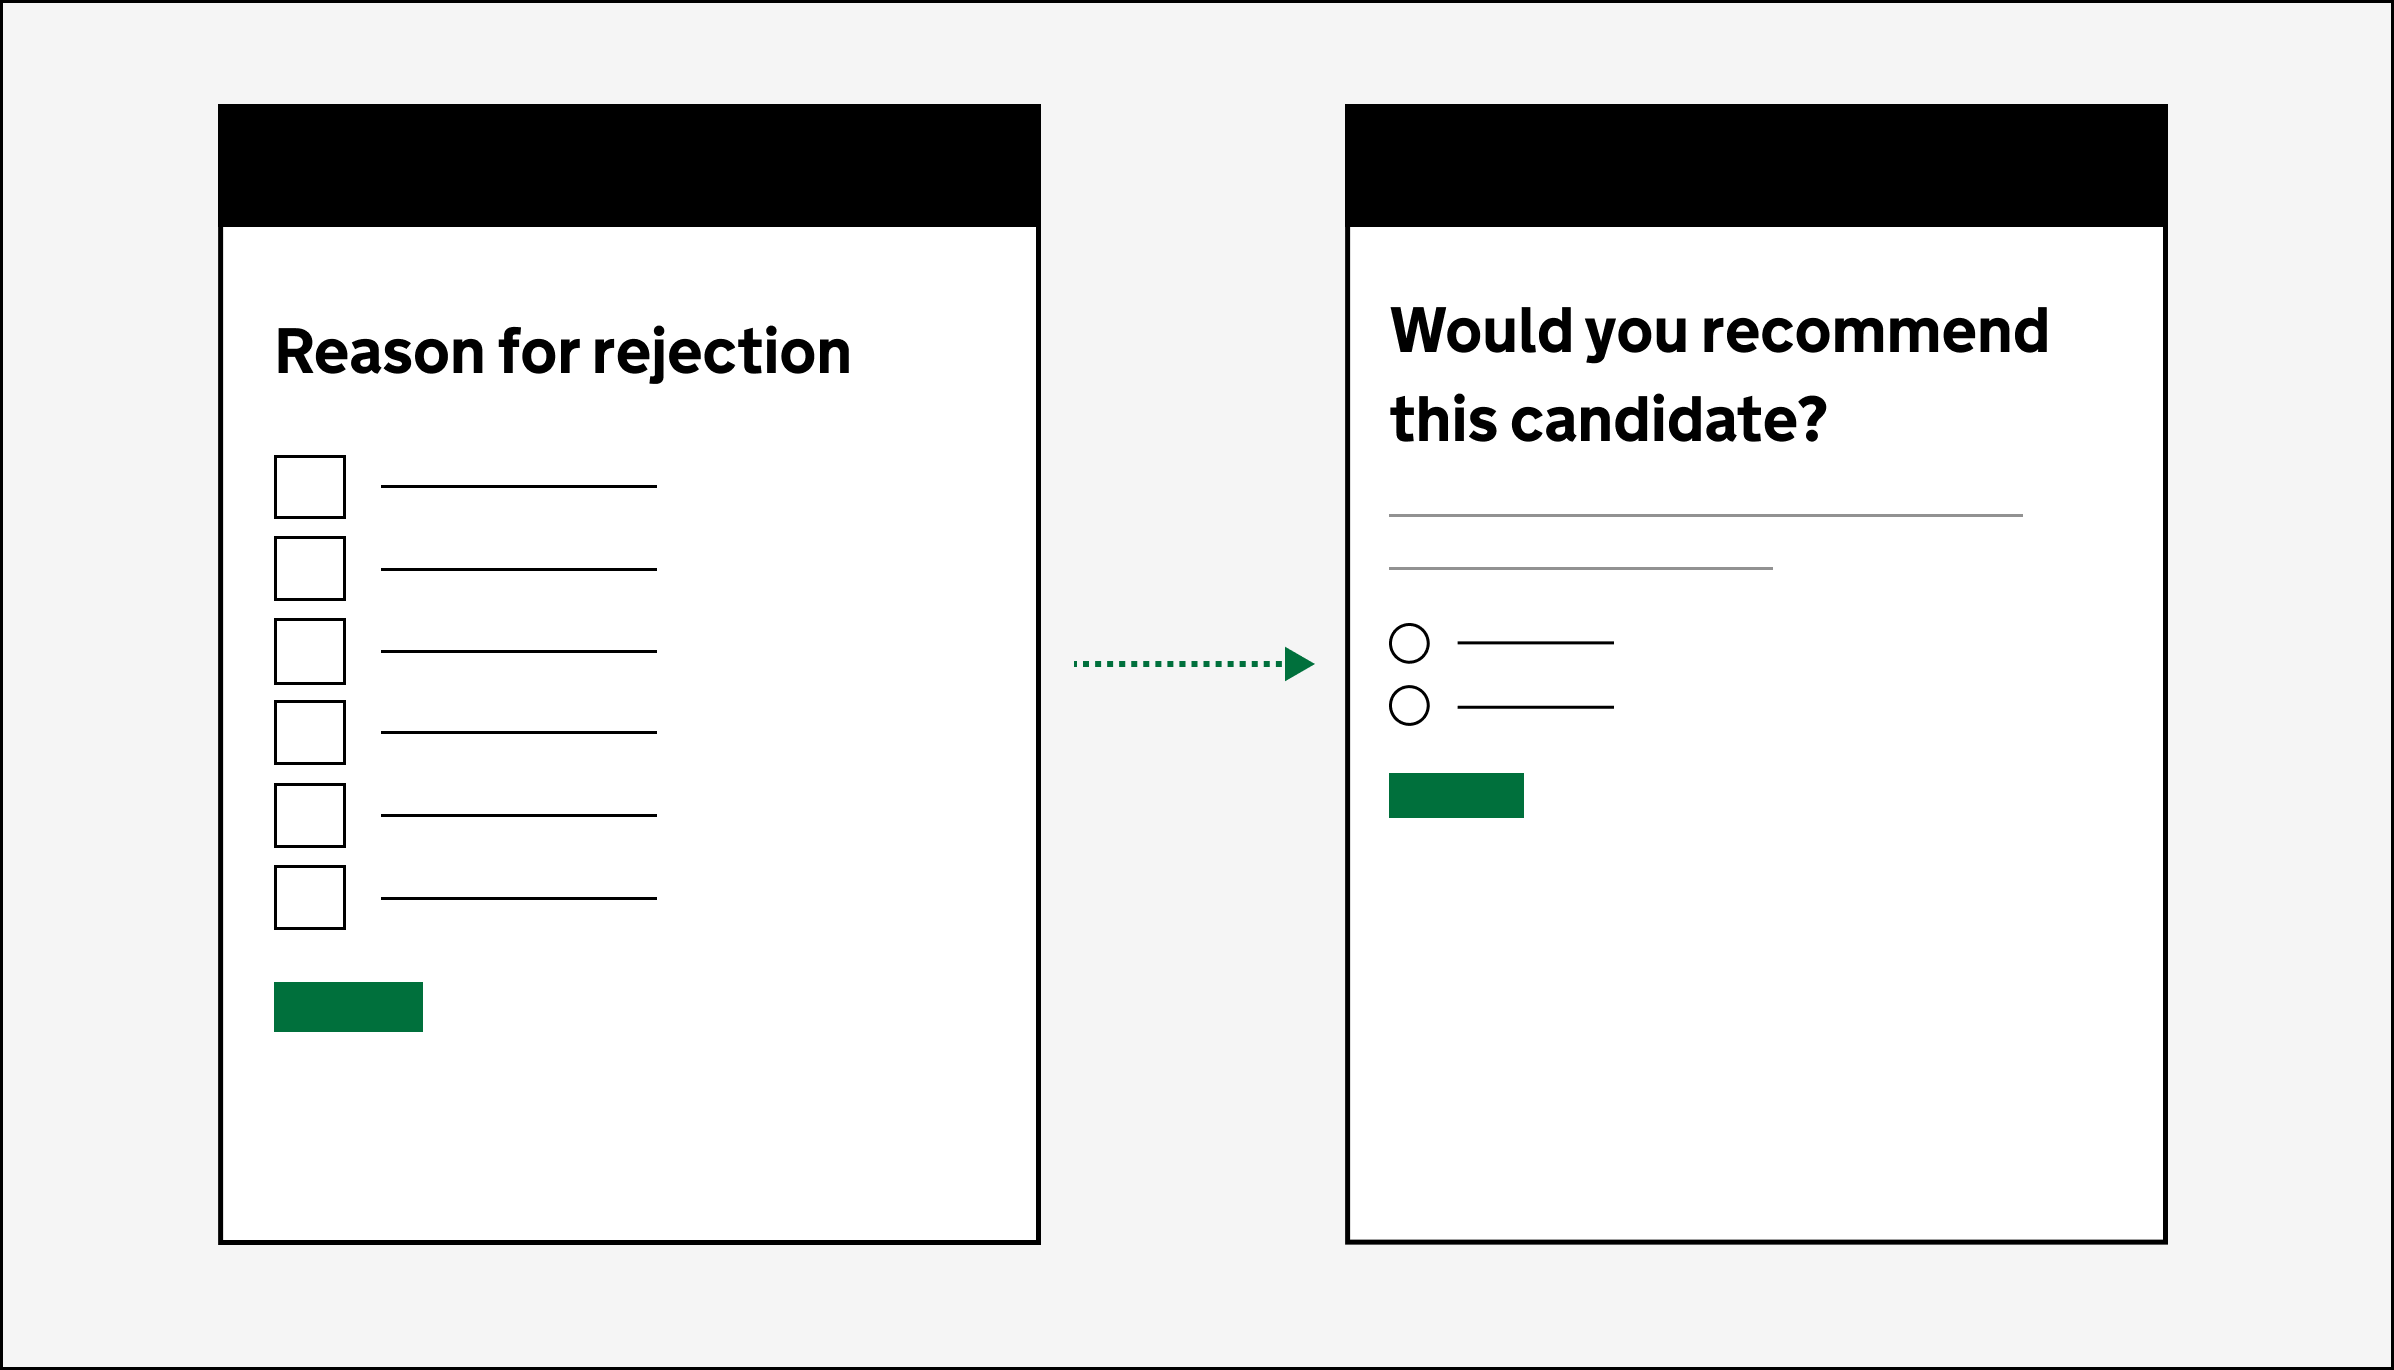 Illustration containing 2 screens: The first screen asks for the reason for rejection with a list of checkboxes. There is a green button below the checkboxes, once the user clisck on this, it goes to the second screen. Te second screen has a question that reads 'Would you recommend this candidate?' Two radio selections are below the question followed by a green button.